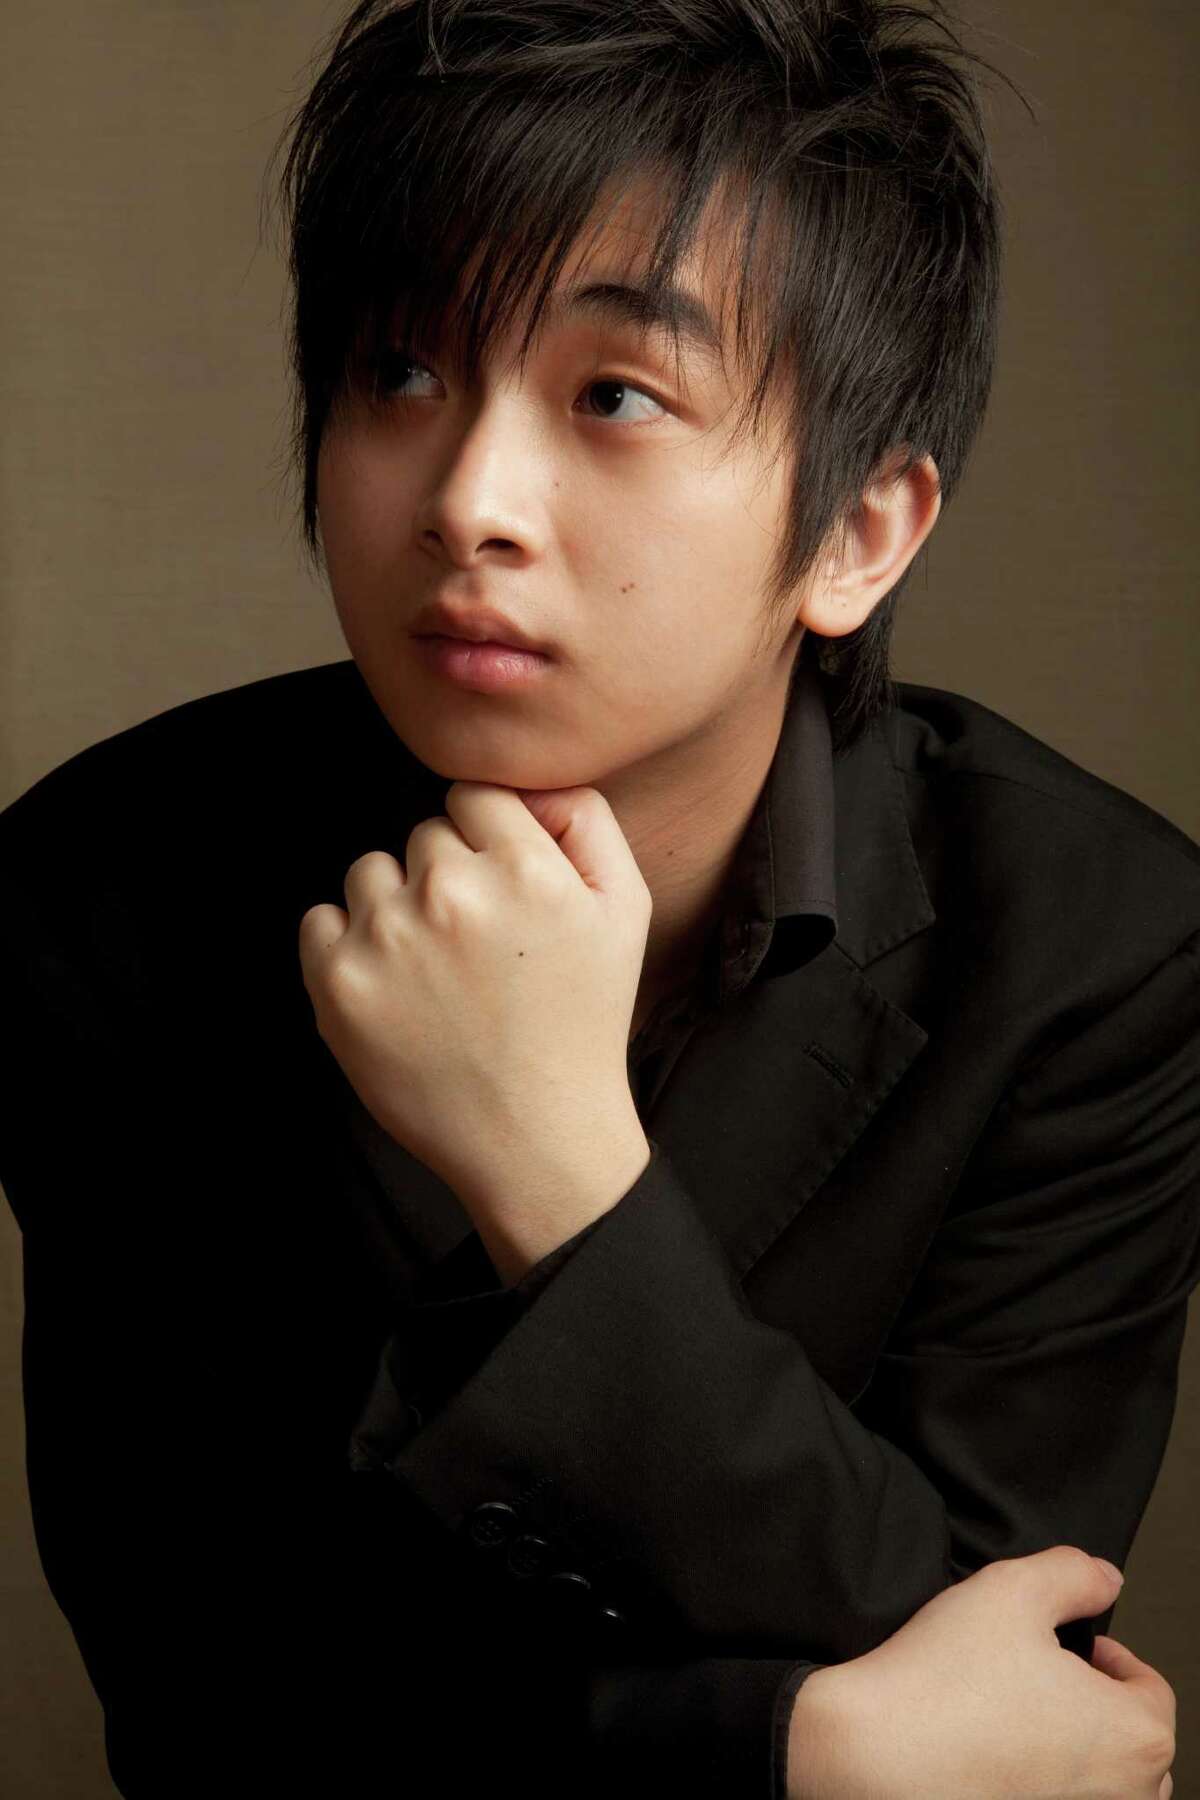 Pianist Brian Yuebing Lin is a semifinalist in the Houston Symphony's Ima Hogg Competition.